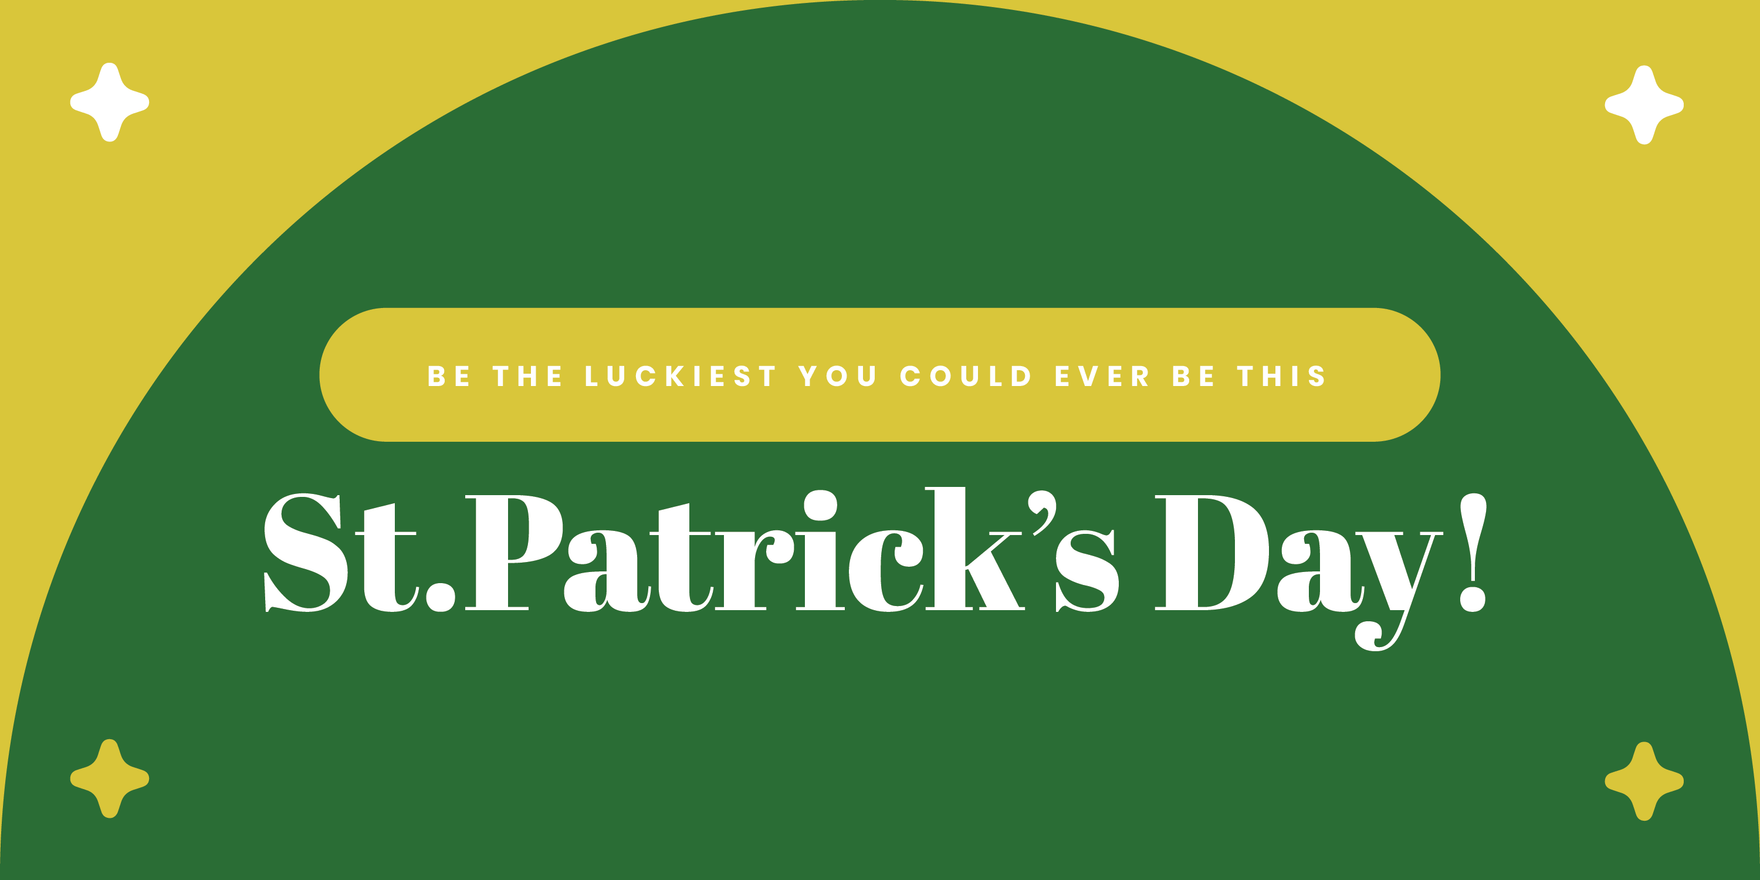 St. Patrick's Day Facebook Cover Banner